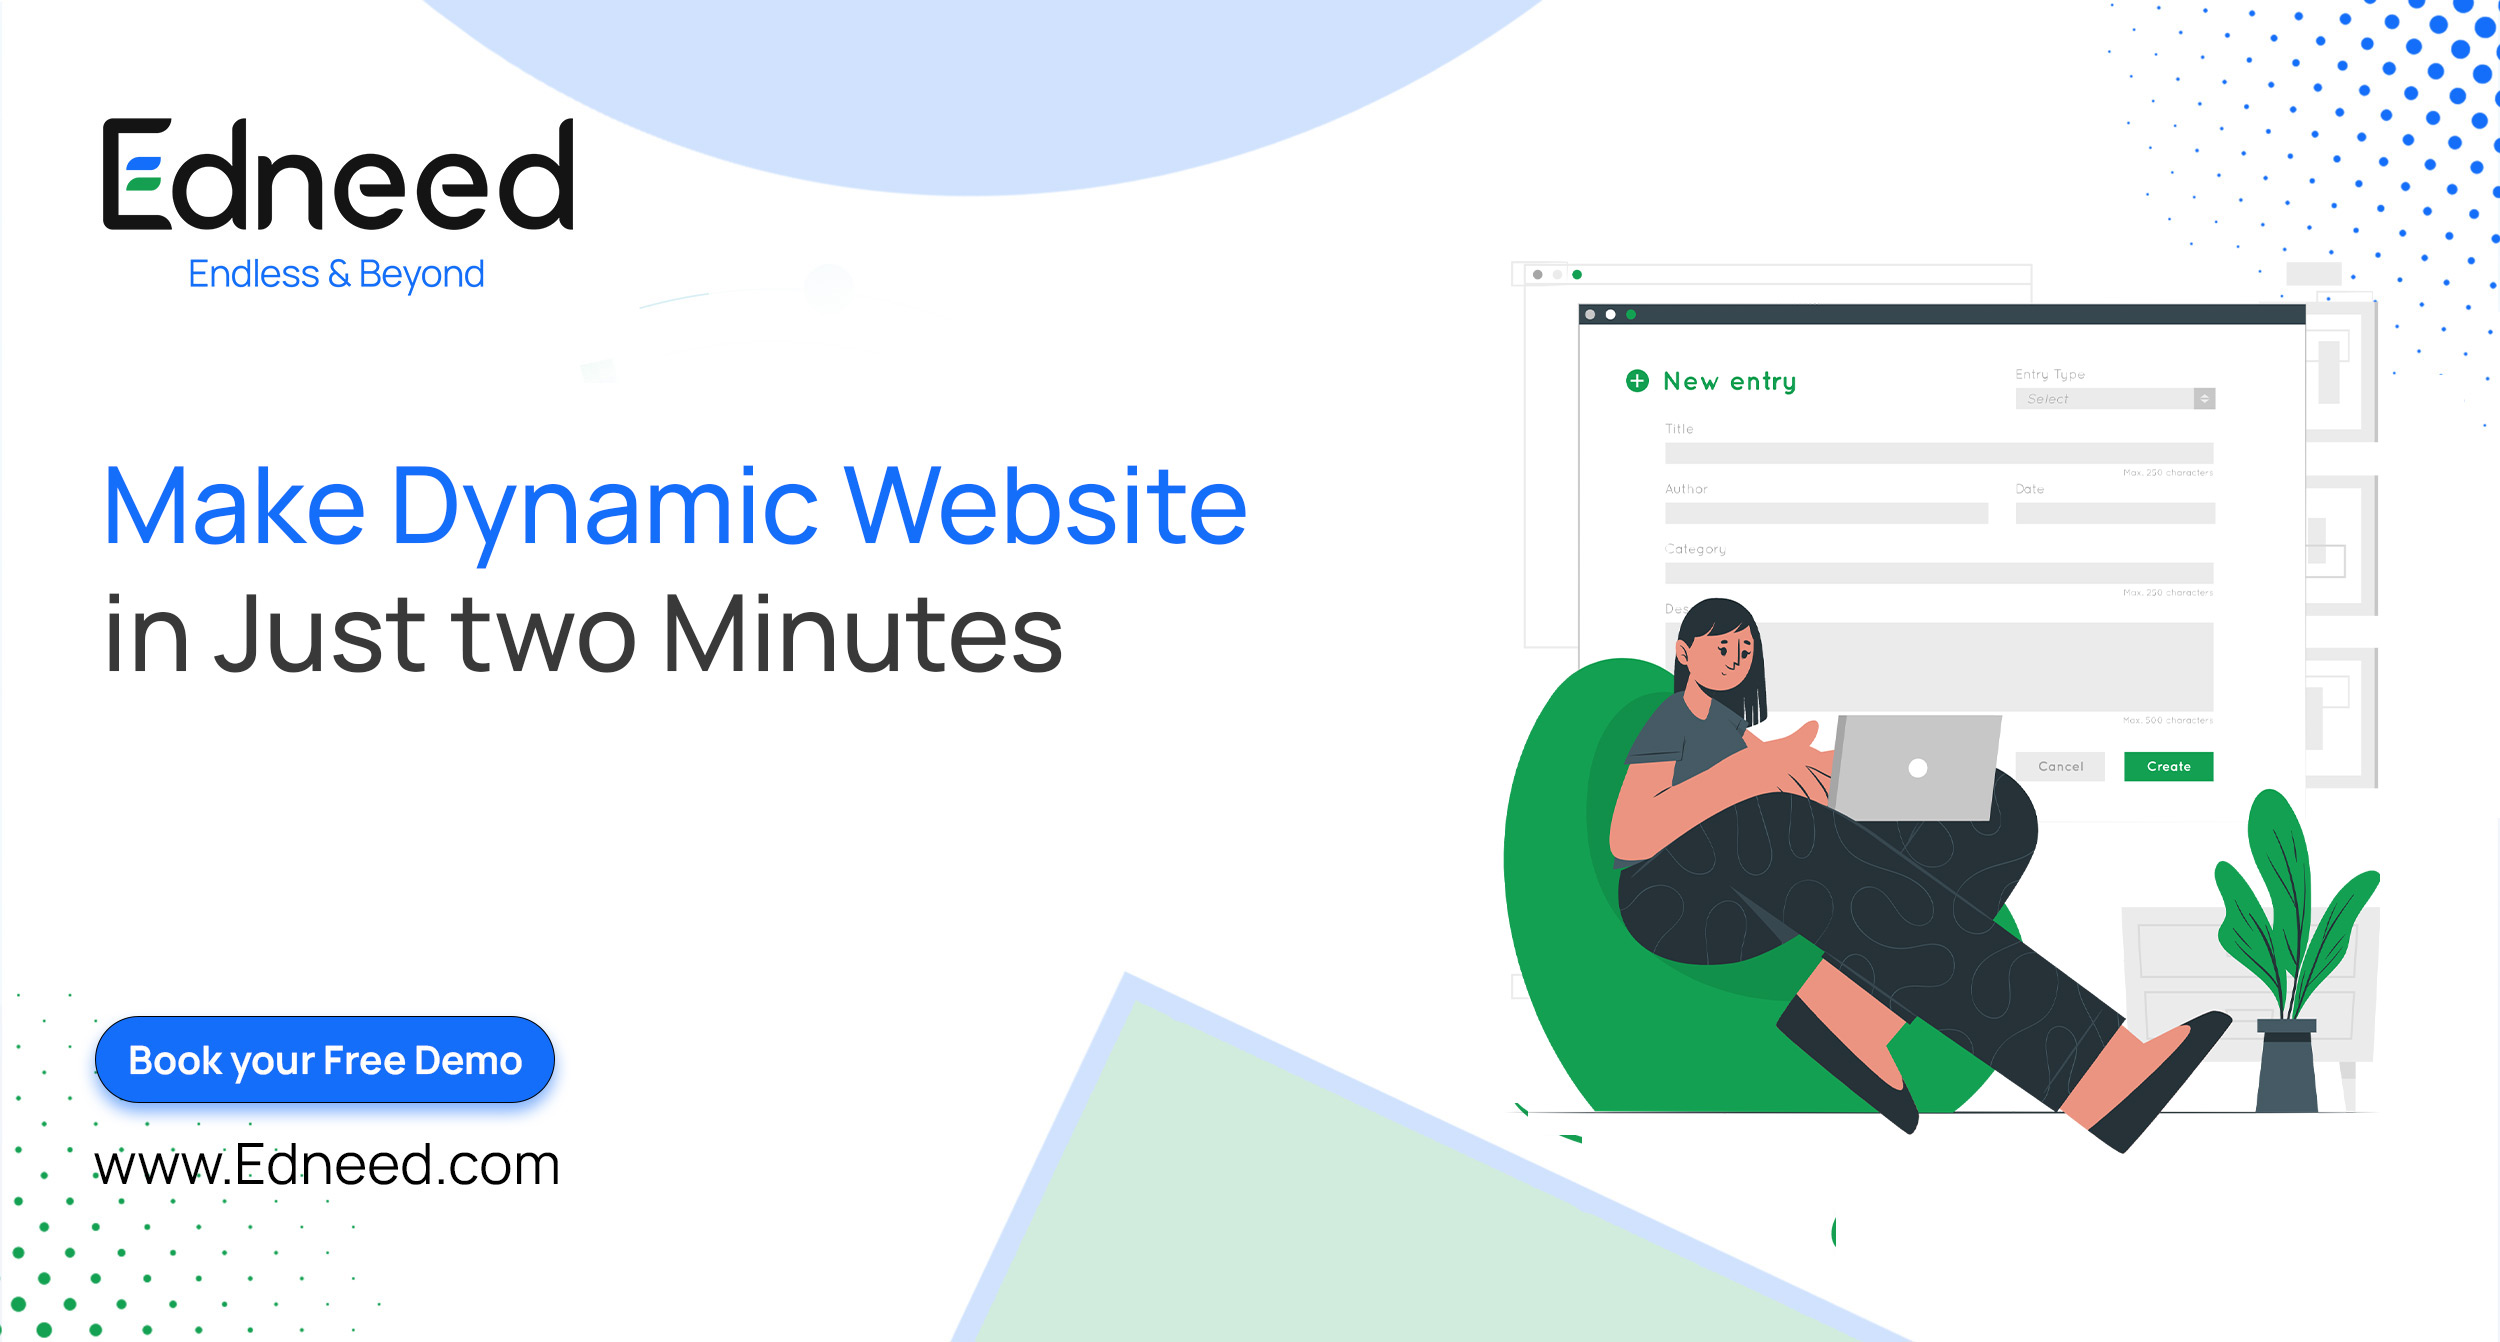 Make Dynamic Website in Just two Minutes - Edneed Blog